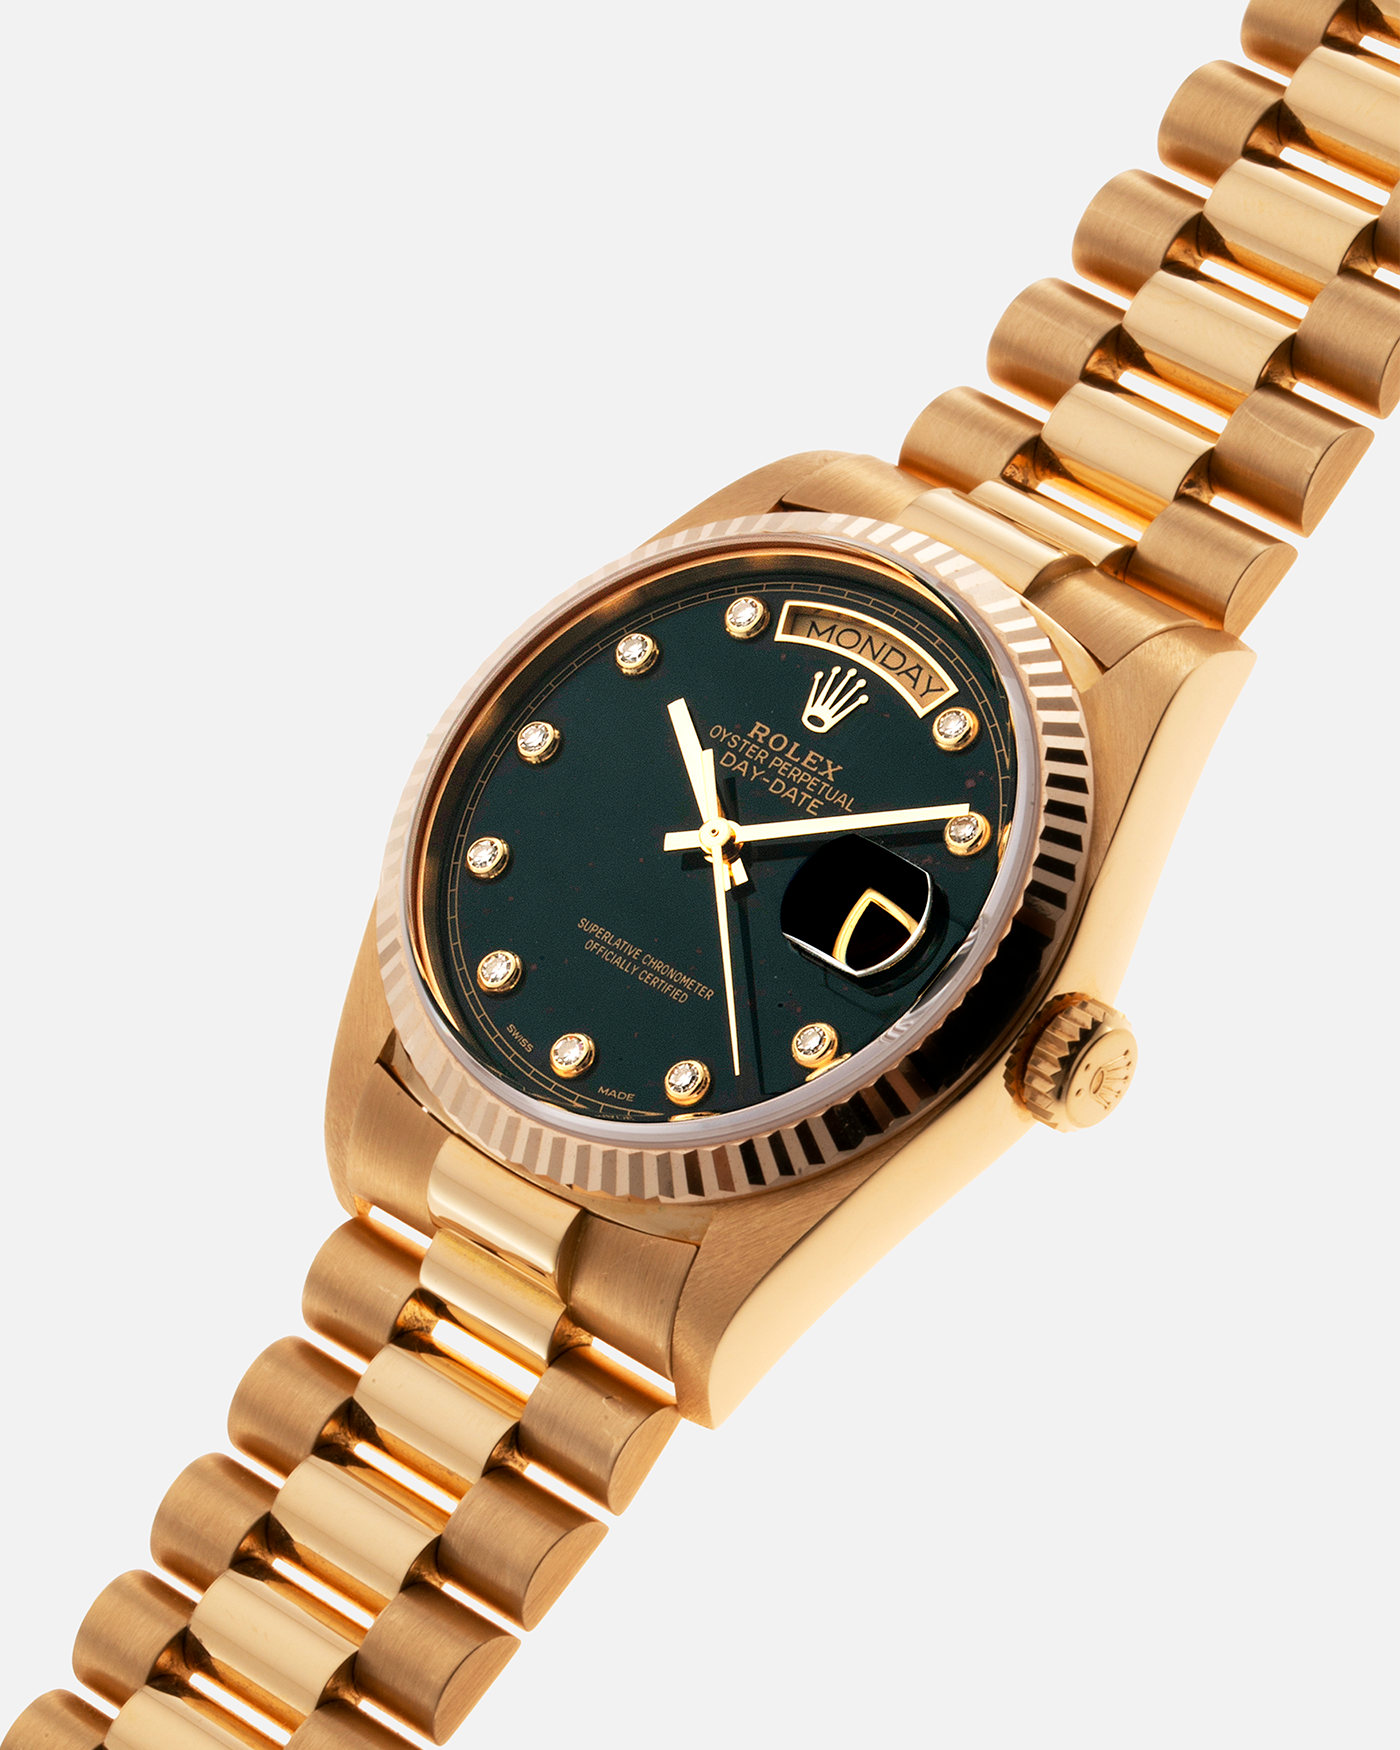 Brand: Rolex Year: 1987 Model: Day Date Reference Number: 18038 Serial: 9.8 Mil Material: 18k Yellow Gold Movement: Cal. 3055 Case Diameter: 36mm Lug Width: 20mm Bracelet/Strap: Rolex 838518k Solid Gold President Bracelet